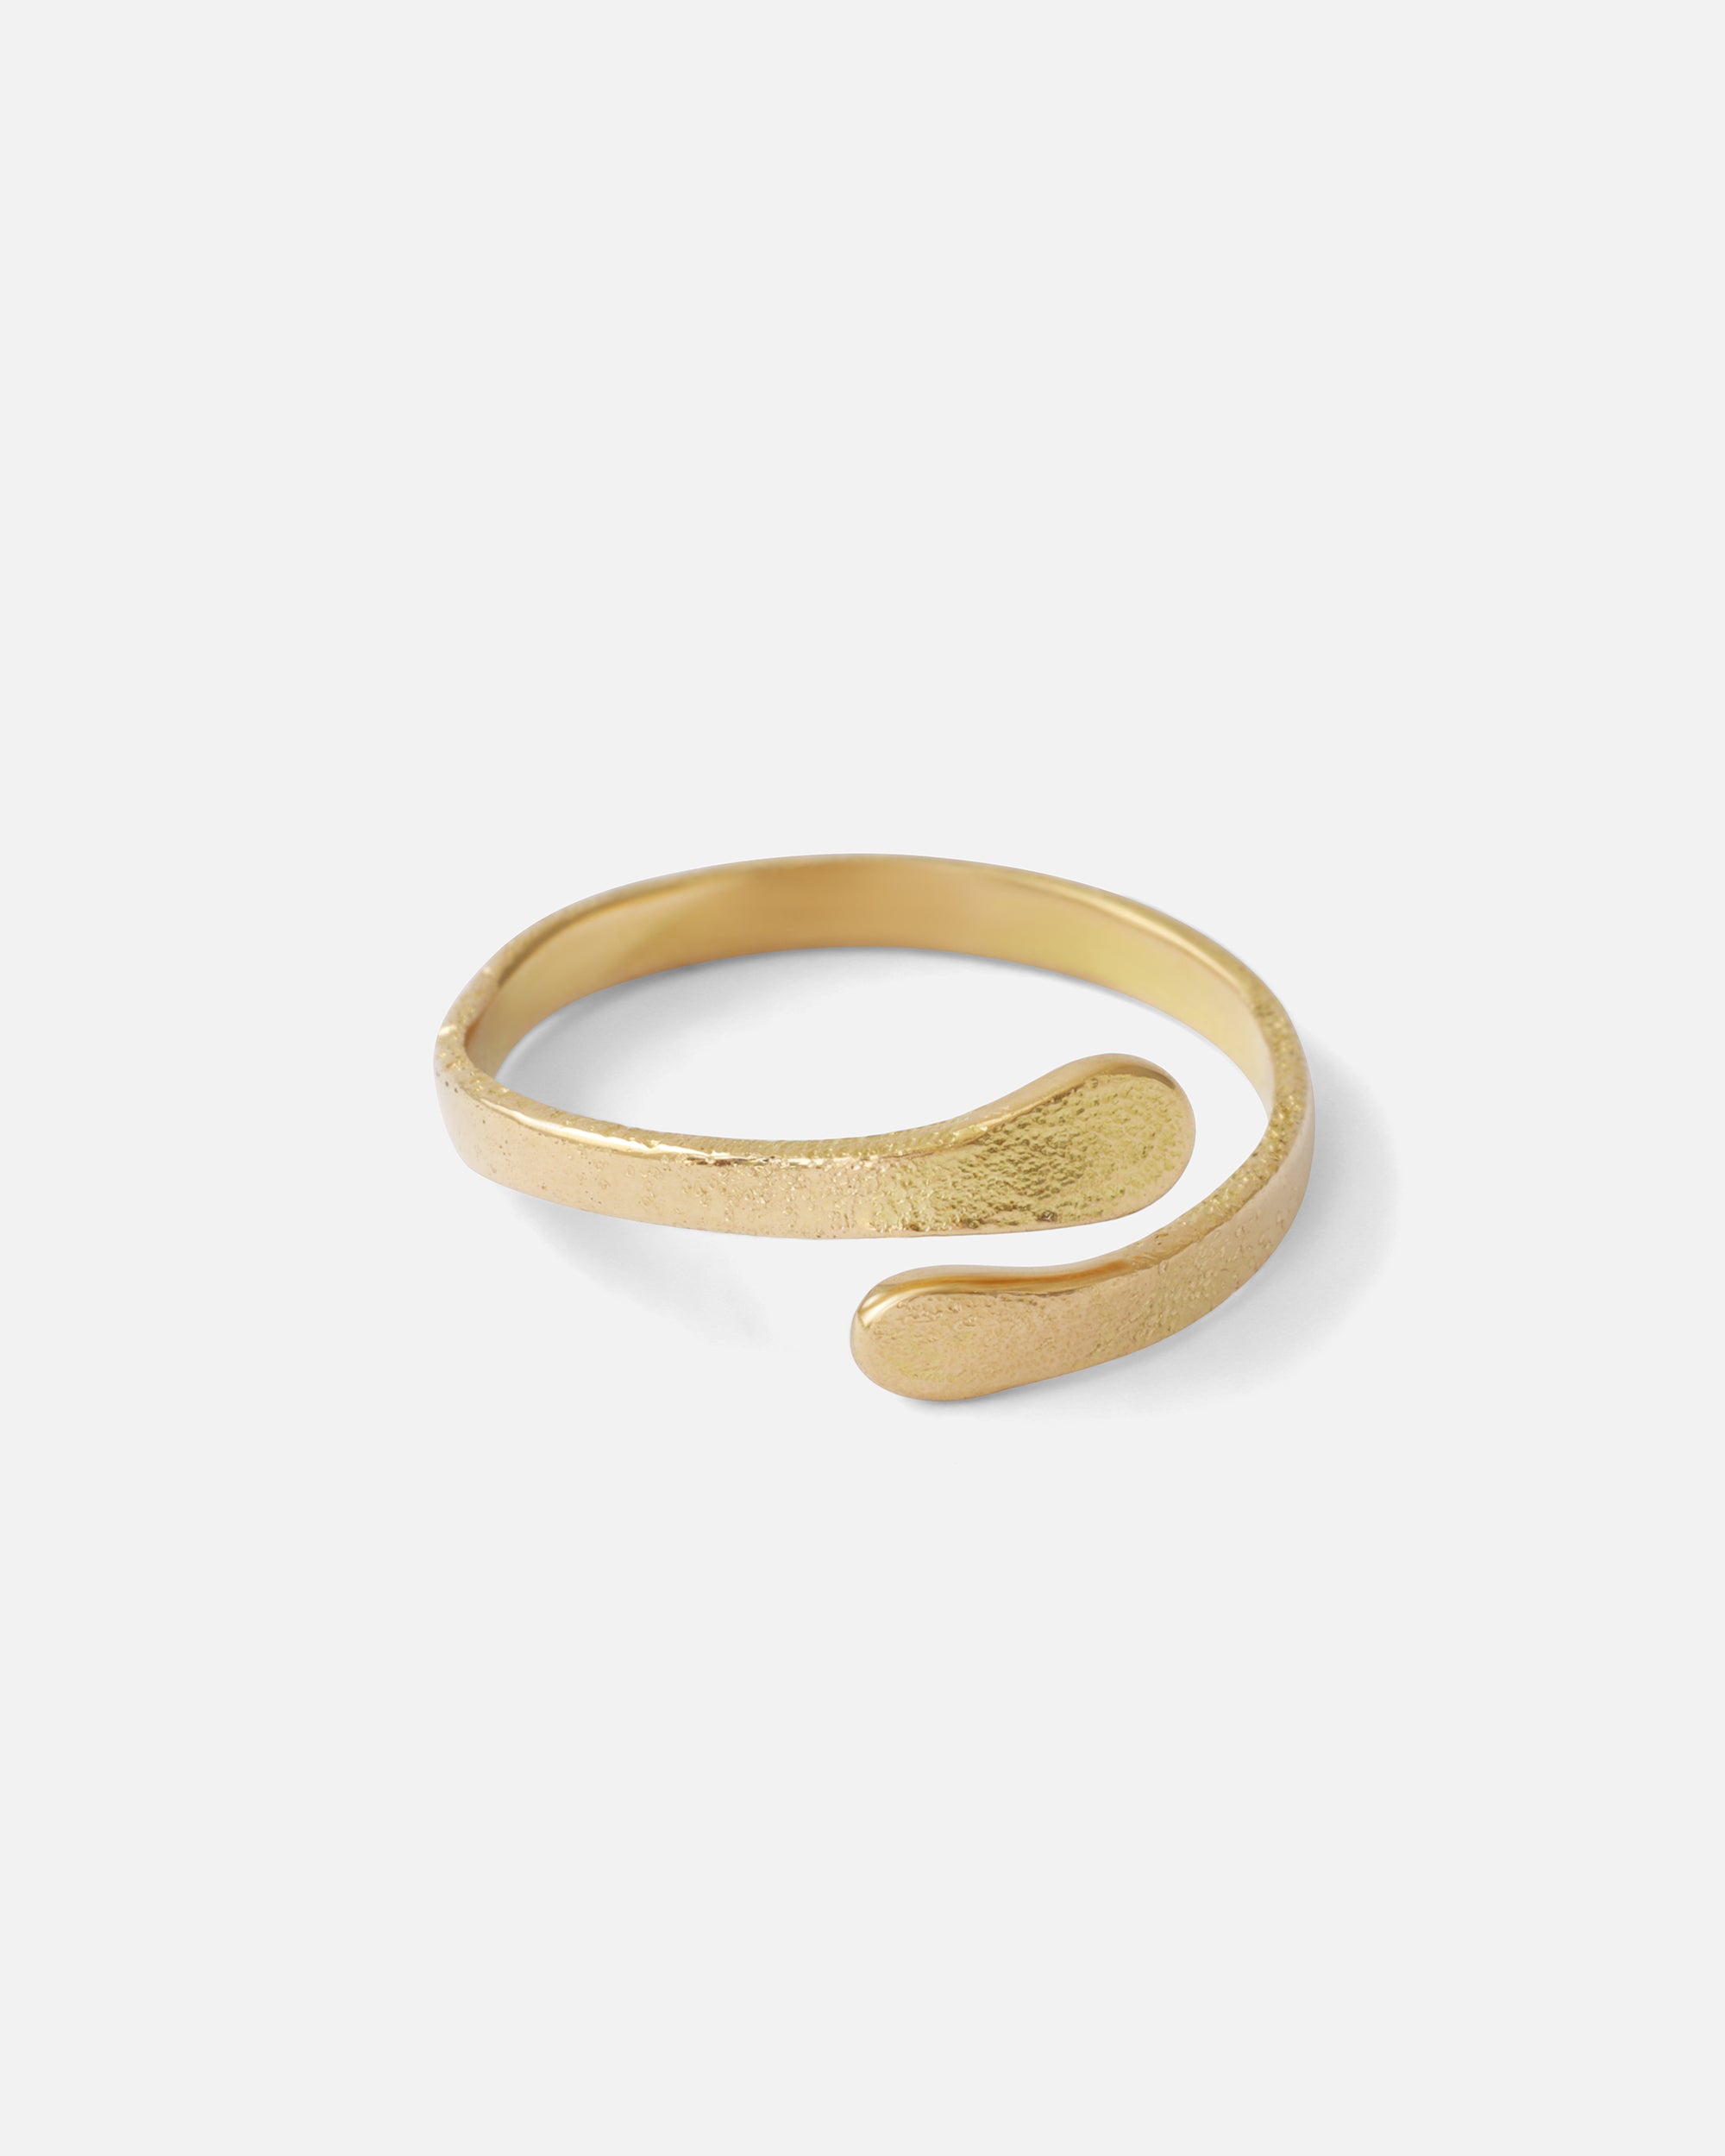 Embrace Ring By Young Sun Song in rings Category